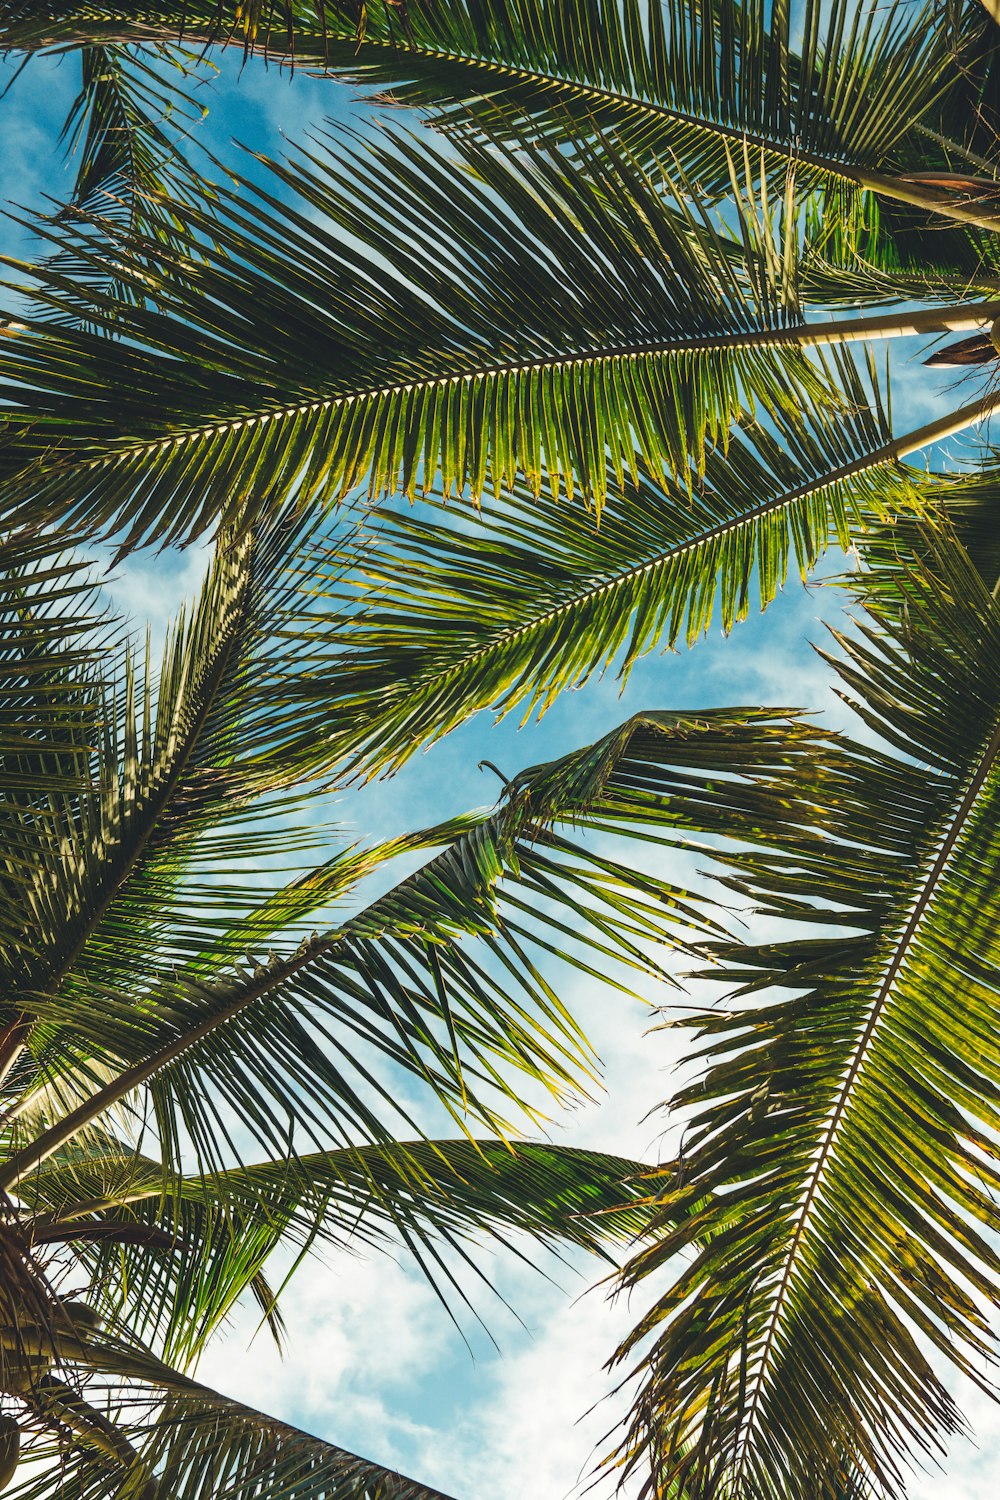 Best 500+ Tropical Pictures  Download Free Images & Stock Photos on  Unsplash